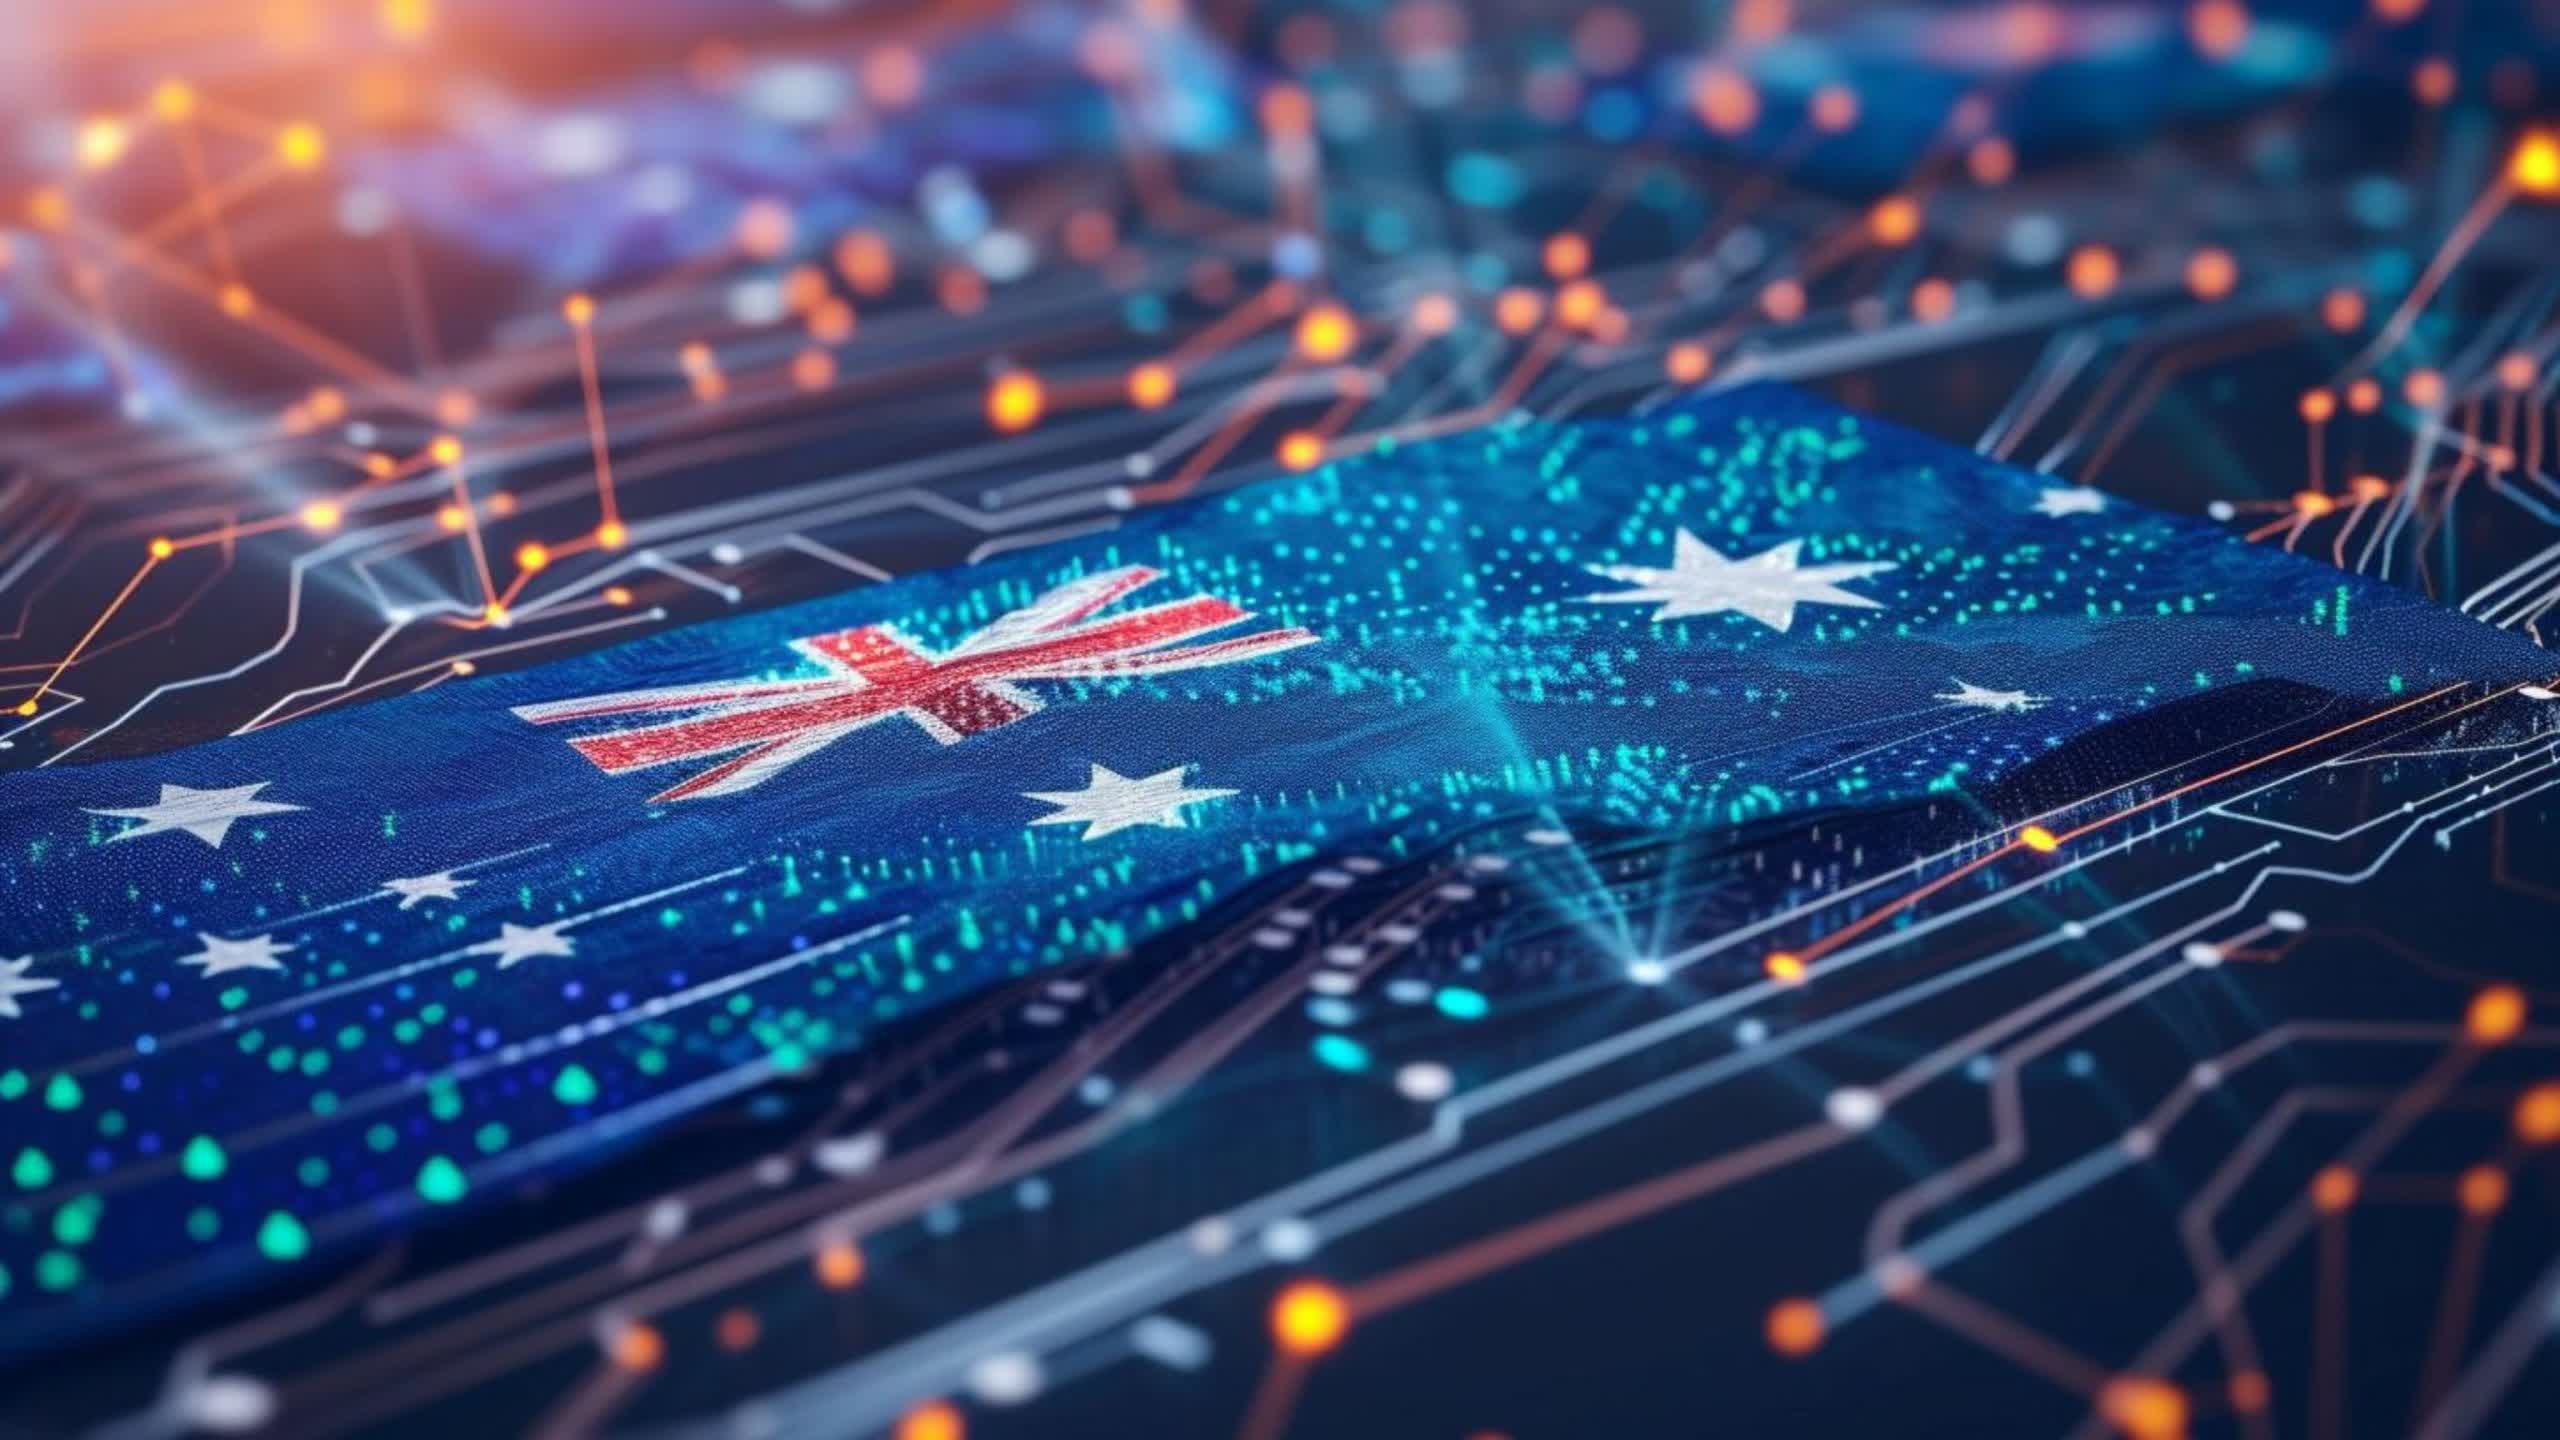 Foreign spies are learning how to sabotage critical Australian infrastructures, intelligence agency warns – The TechLead